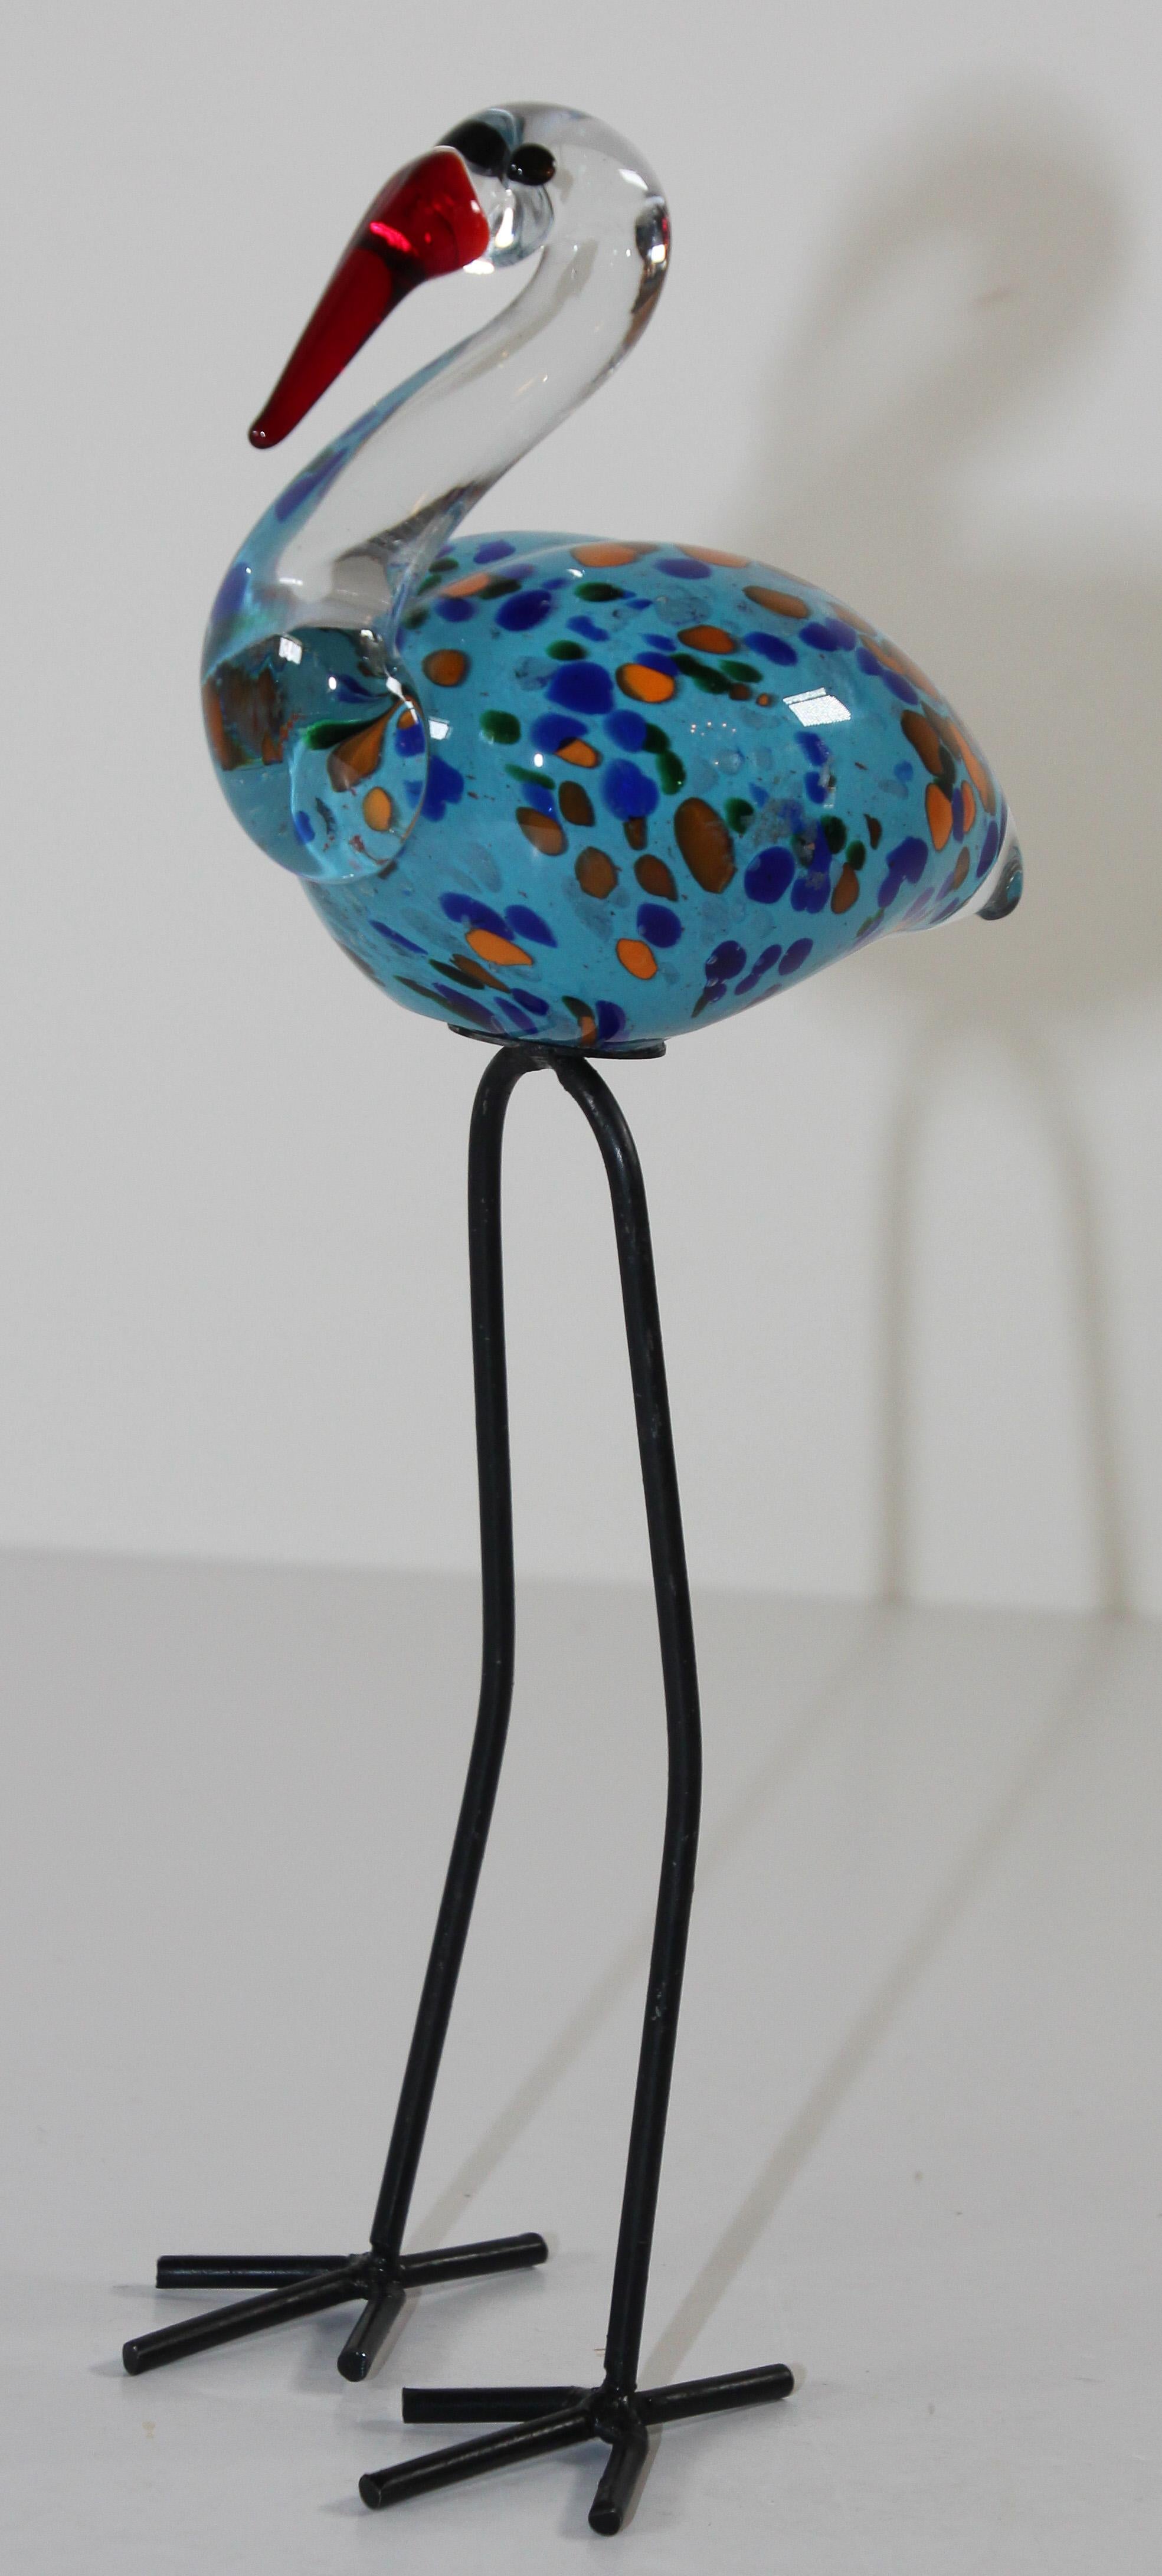 Vintage Murano art glass hand blown sculpture bird Flamingo figurine with long metal legs.
Beautiful Mid-Century Modern hand blown glass bird.
The body of bubbles Italian art glass decorated in clear, blue, orange and white bubbles with long metal